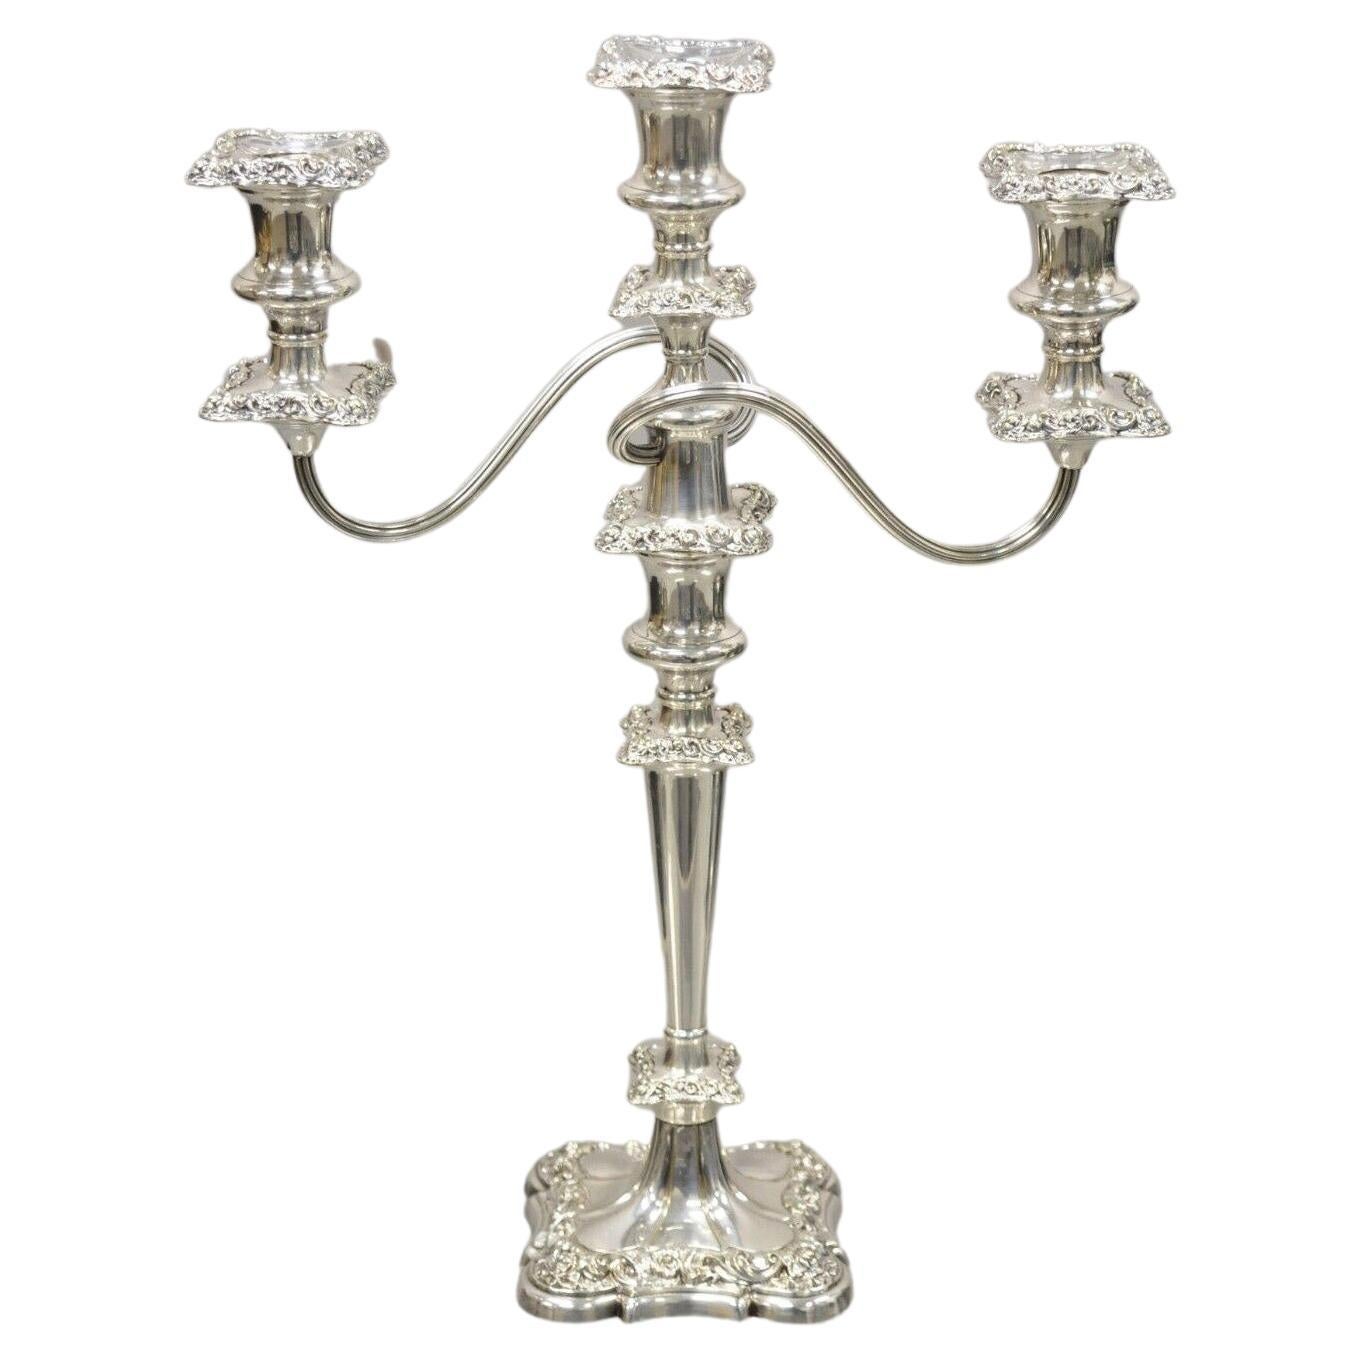 Antique Gorham Floral Repousse Twin Arm Silver Plated Candlestick Candelabra For Sale